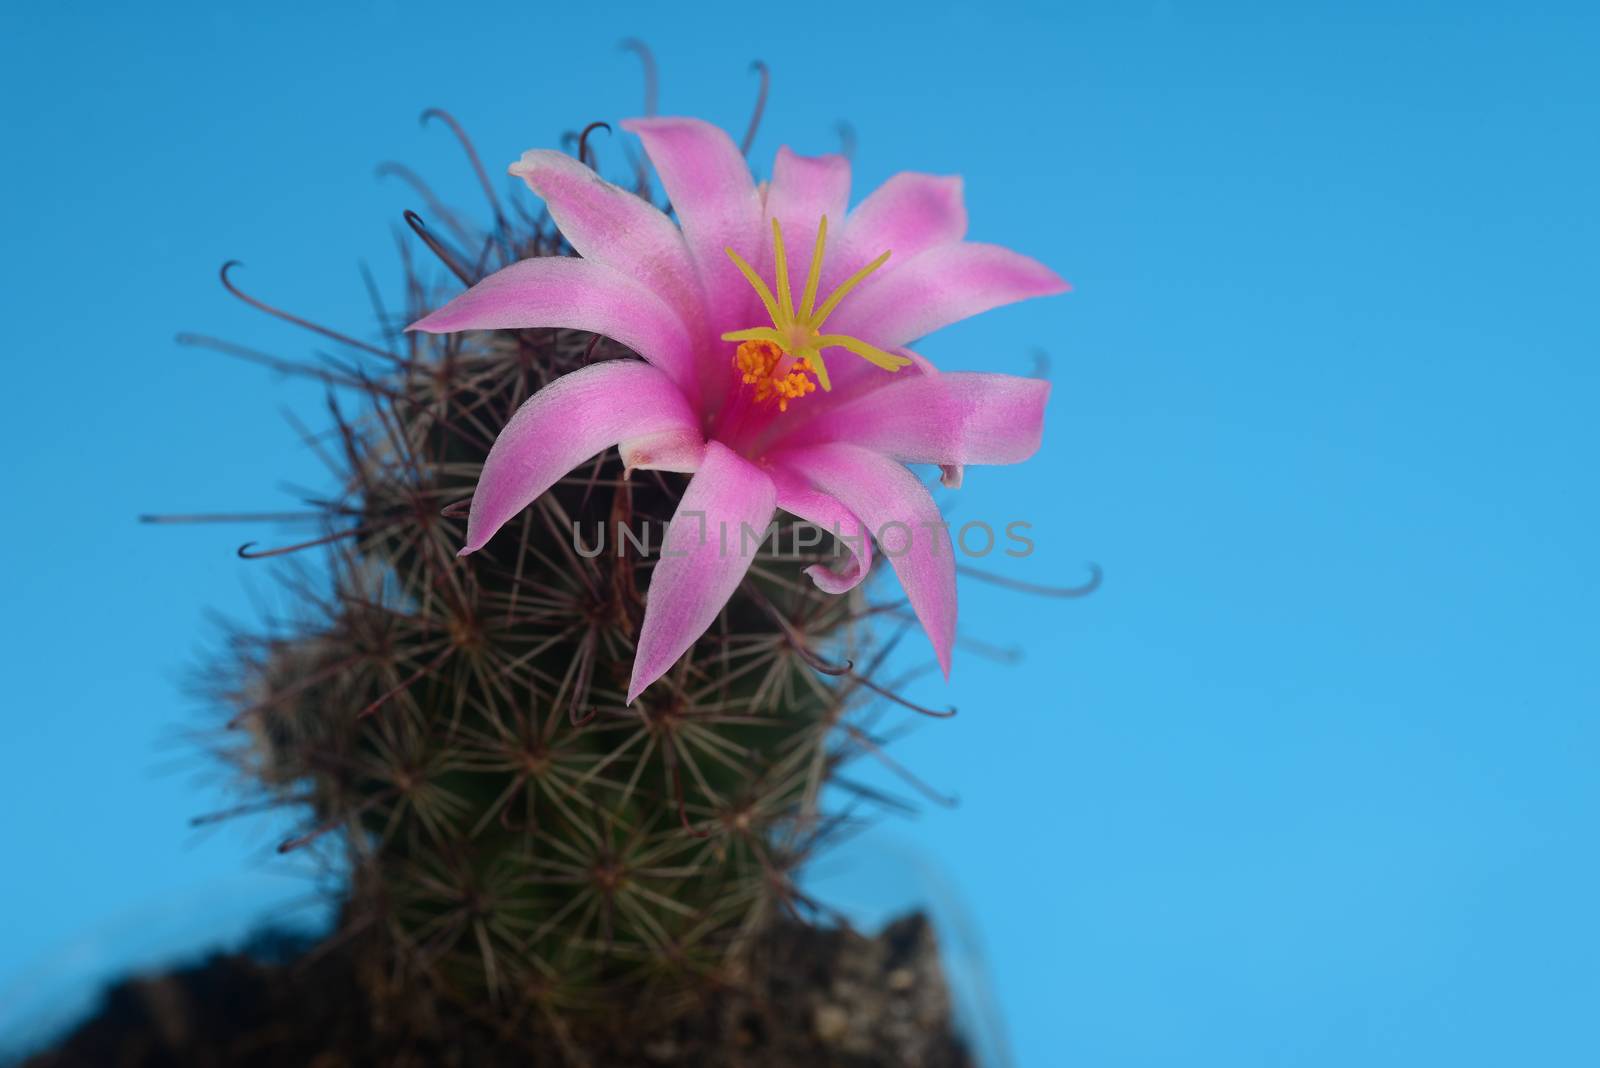 Blooming pink flower of mammillaria beneckei  cactus on  blue  background by ideation90